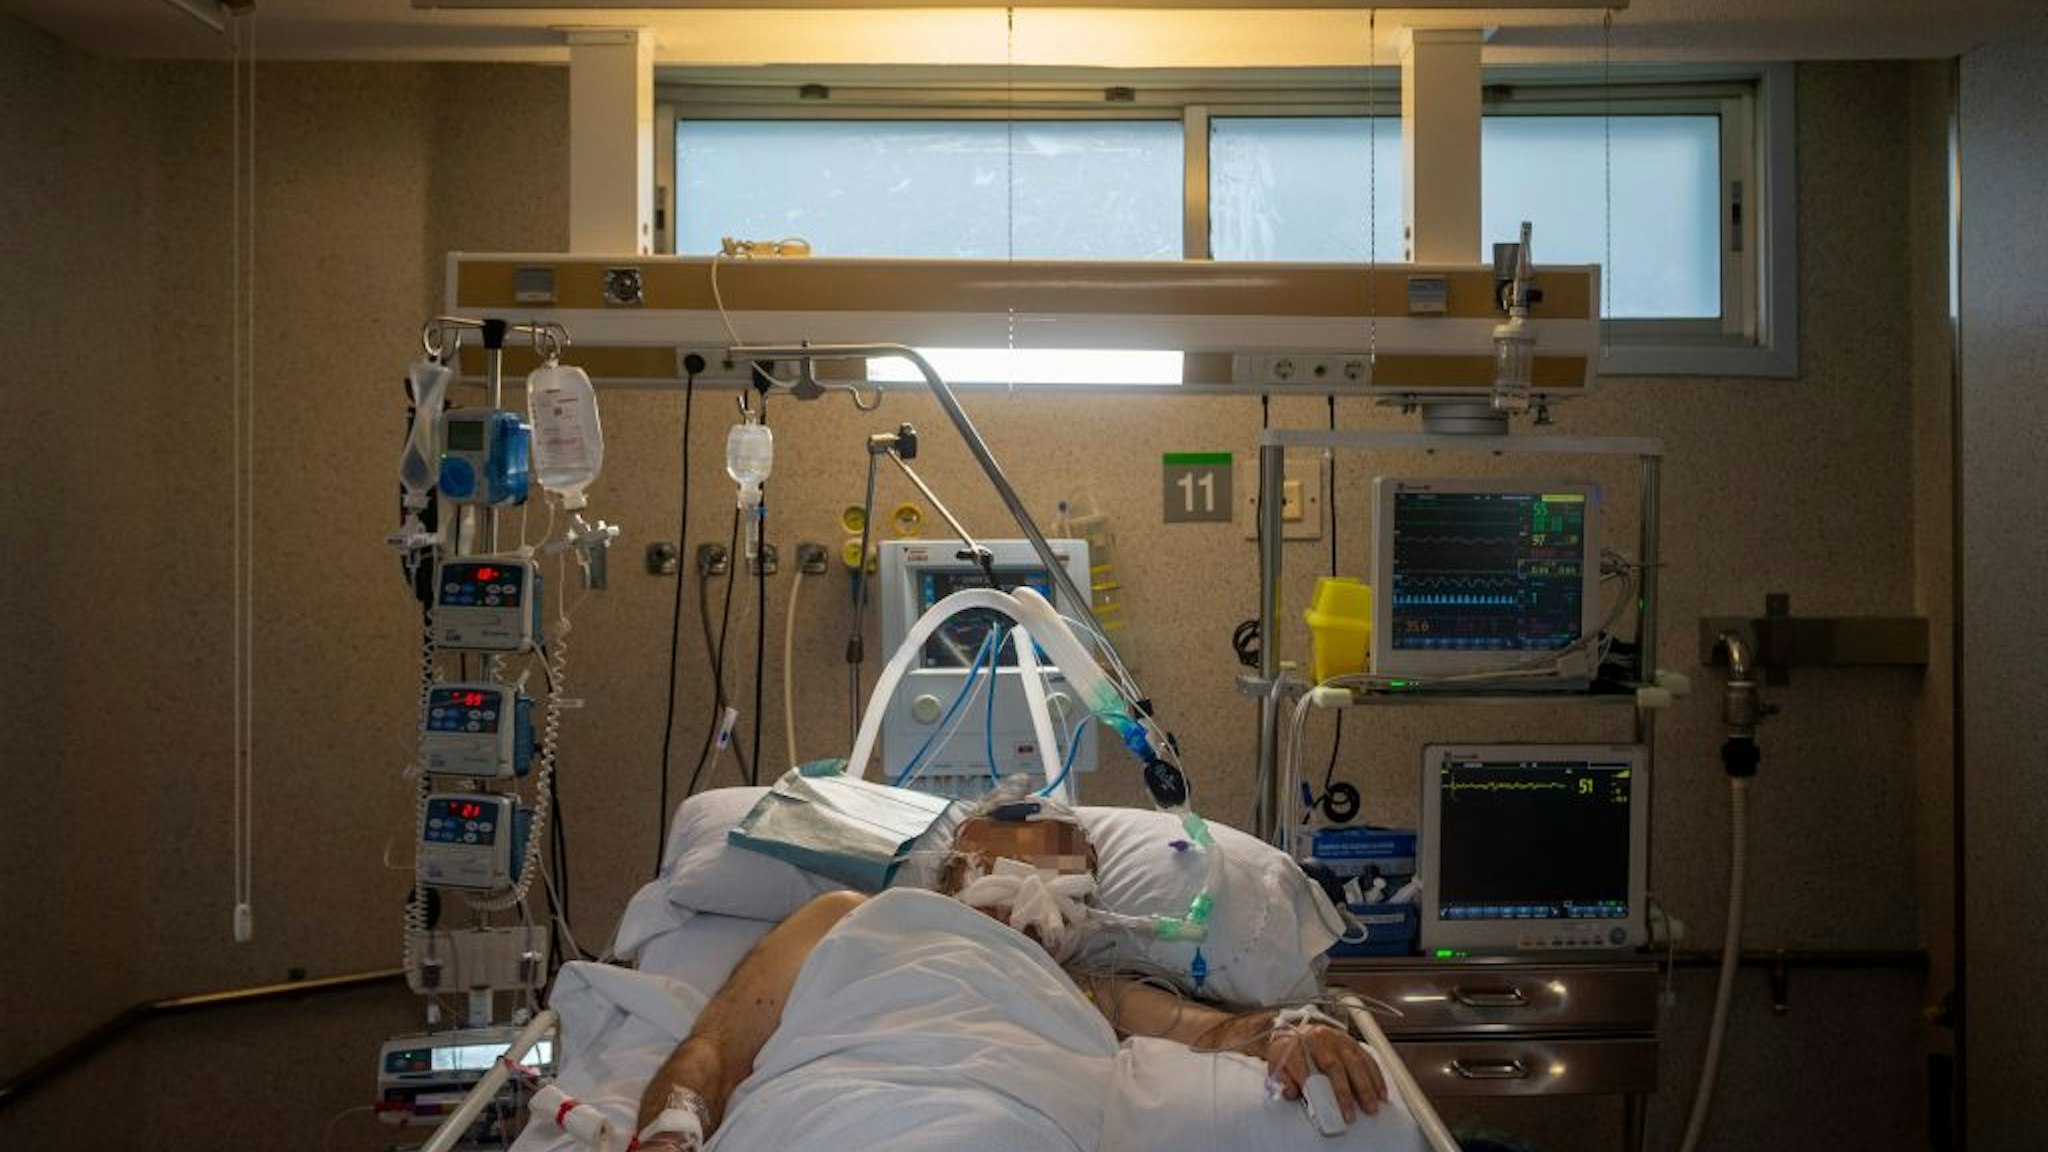 TOPSHOT - A COVID-19 coronavirus patient lies in bed at the Intensive Unit Care of the Povisa Hospital in Vigo, northwestern Spain, on April 16, 2020. - Spain's coronavirus death toll soared past 19,000 with another 551 deaths, but questions over the counting method have raised some regional concerns the real figure is much higher. (Photo by MIGUEL RIOPA / AFP) (Photo by MIGUEL RIOPA/AFP via Getty Images)